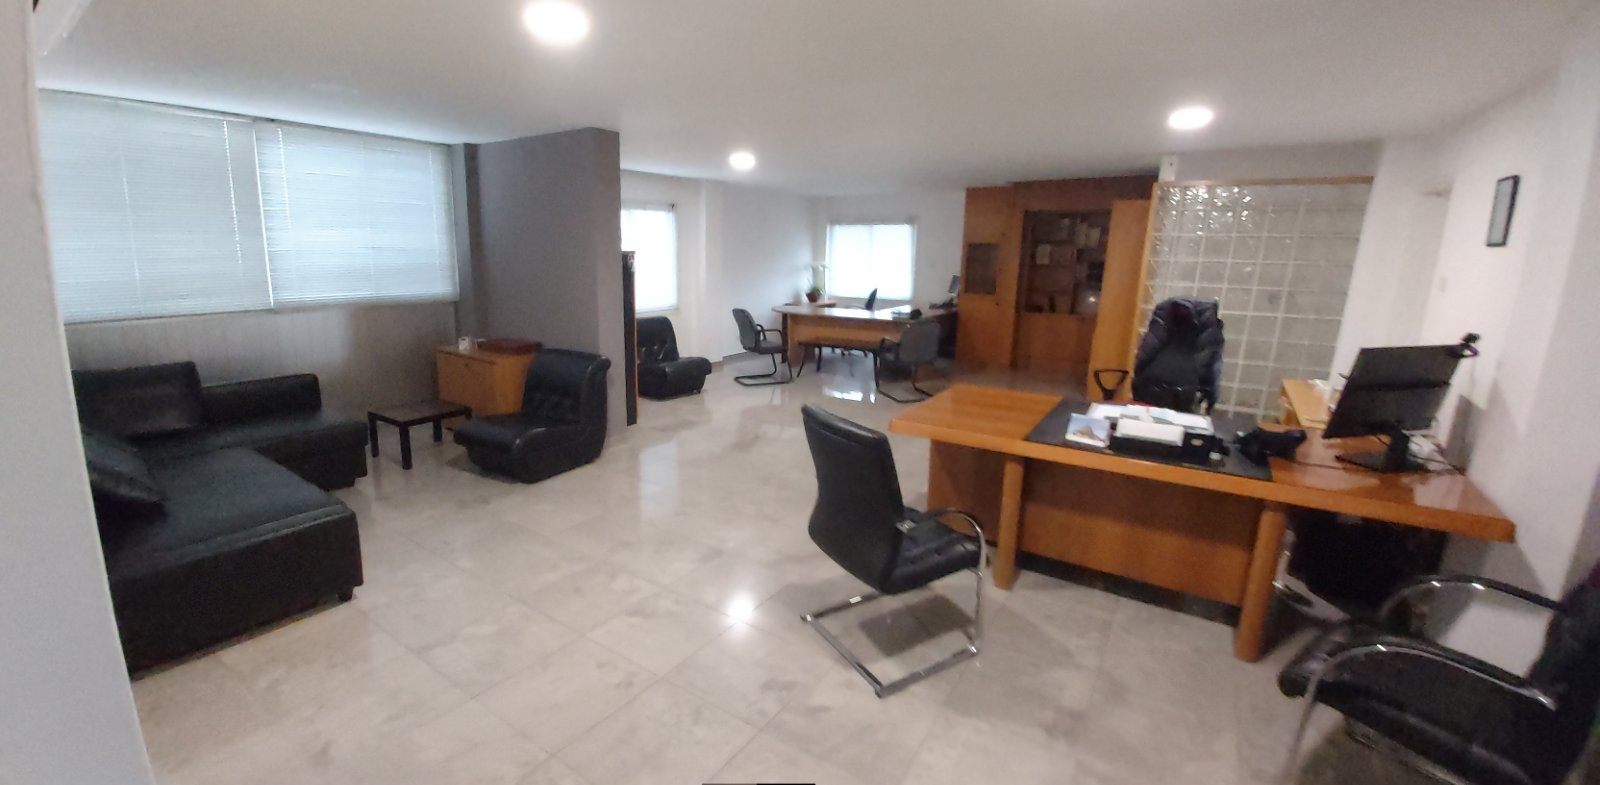 OFFICE SPACE IN AYIA ZONIS AREA LIMASSOL